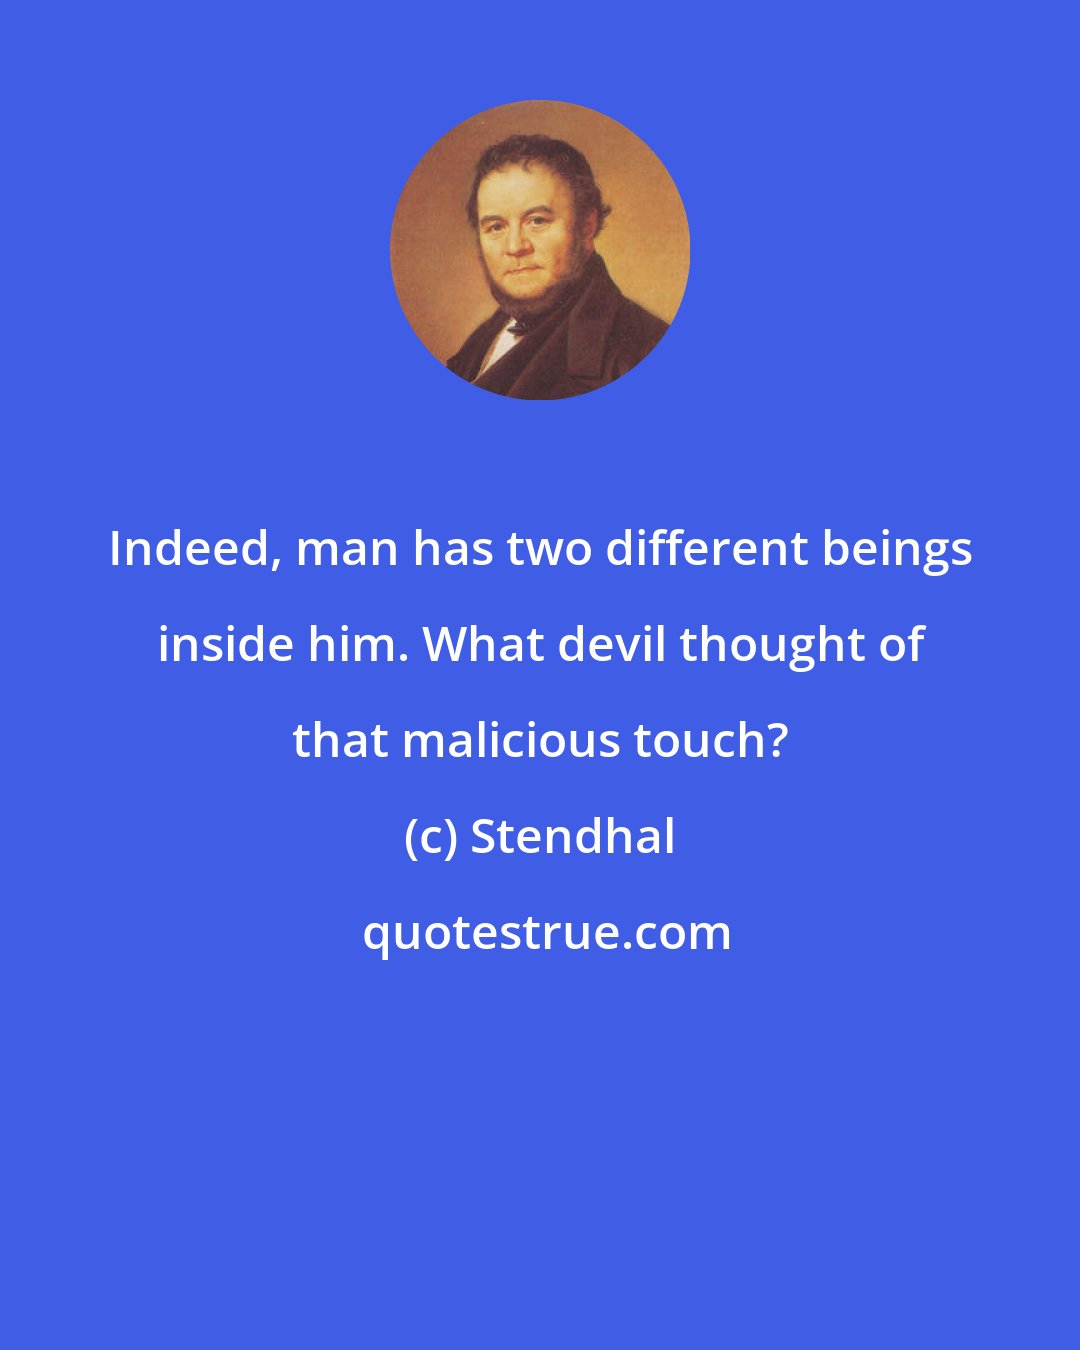 Stendhal: Indeed, man has two different beings inside him. What devil thought of that malicious touch?